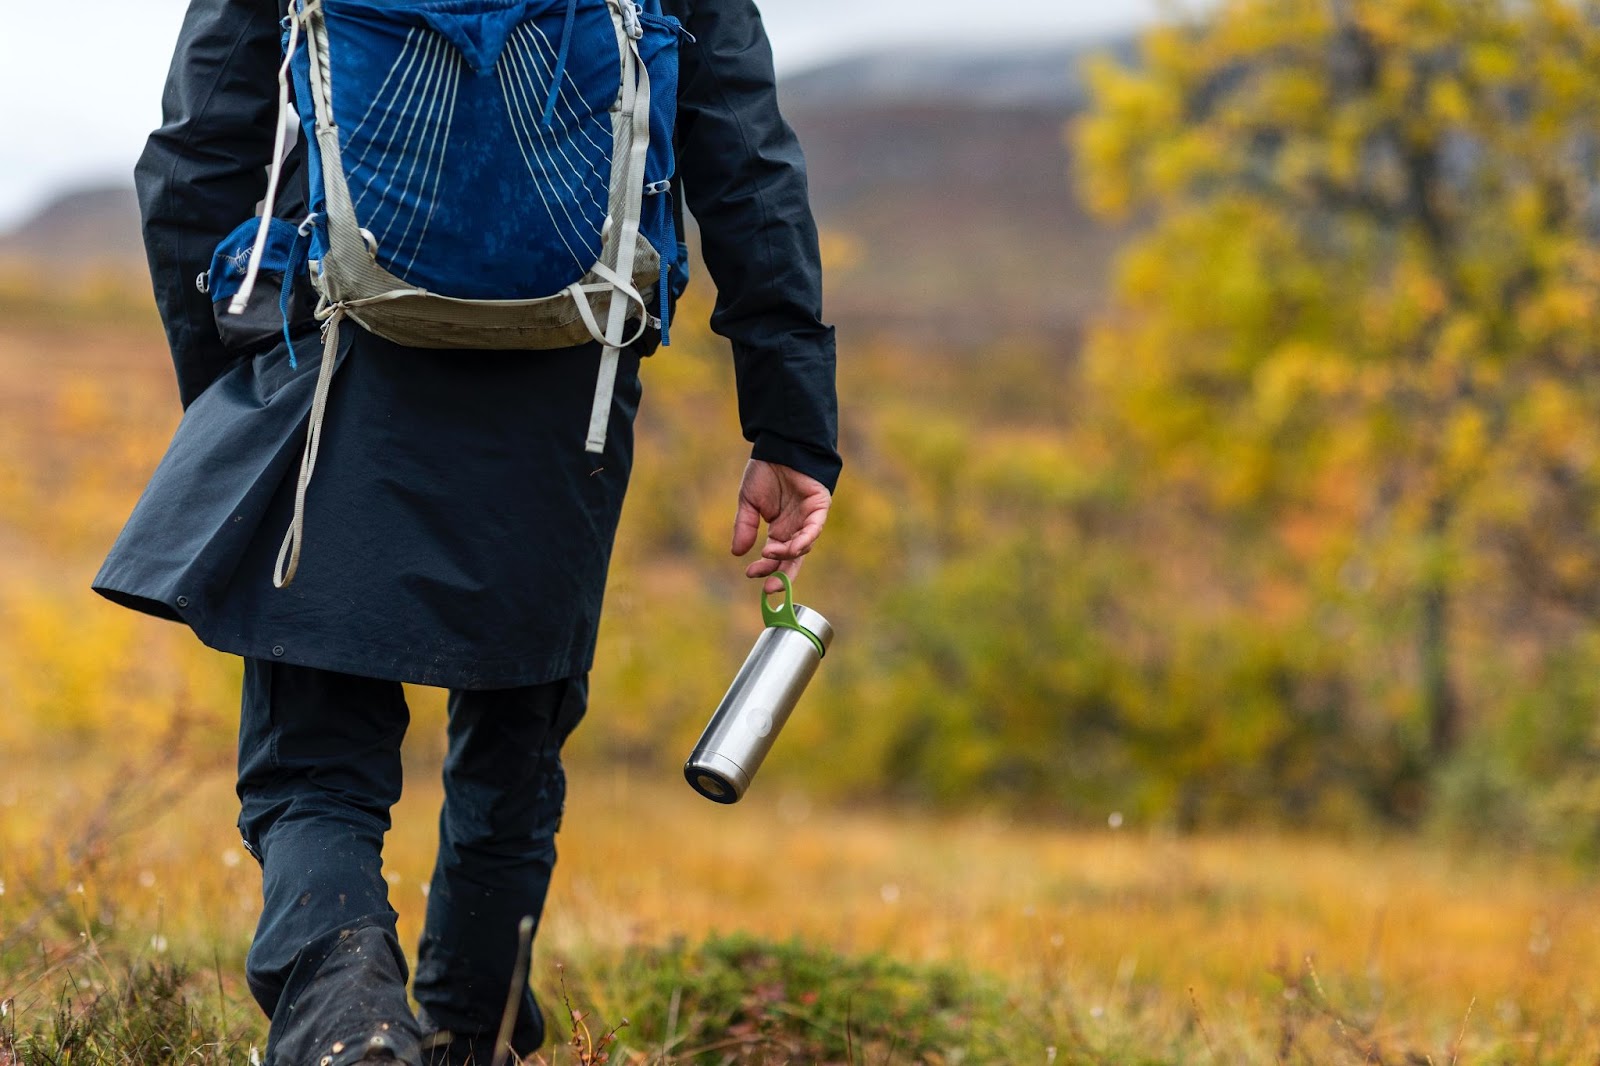 Person with a blue backpack and reusable water bottle walking over rural ground